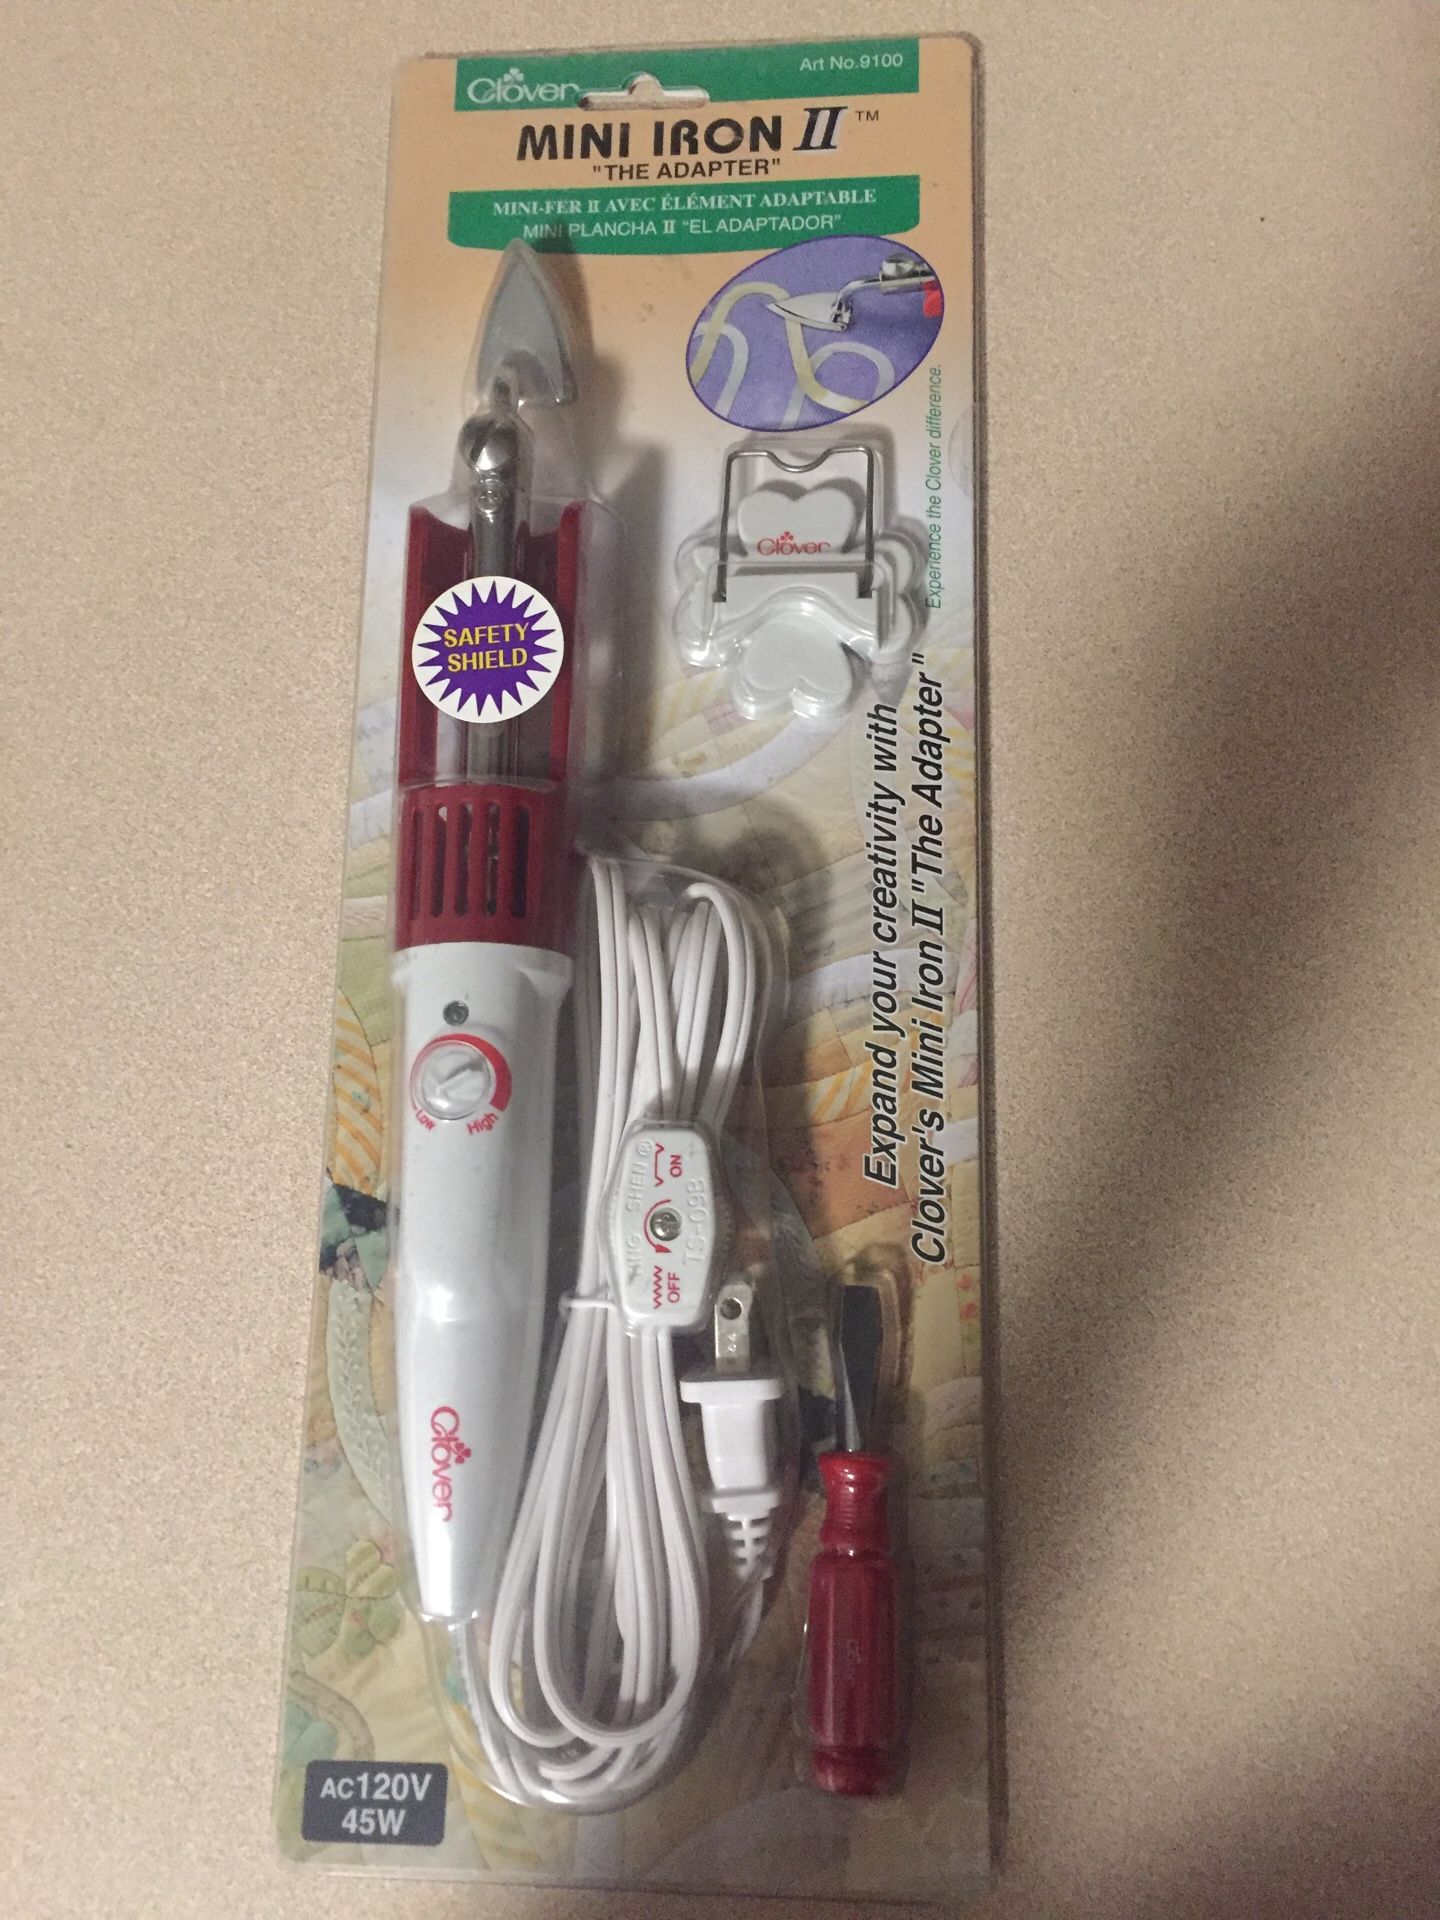 Brand new never opened mini iron for crafting